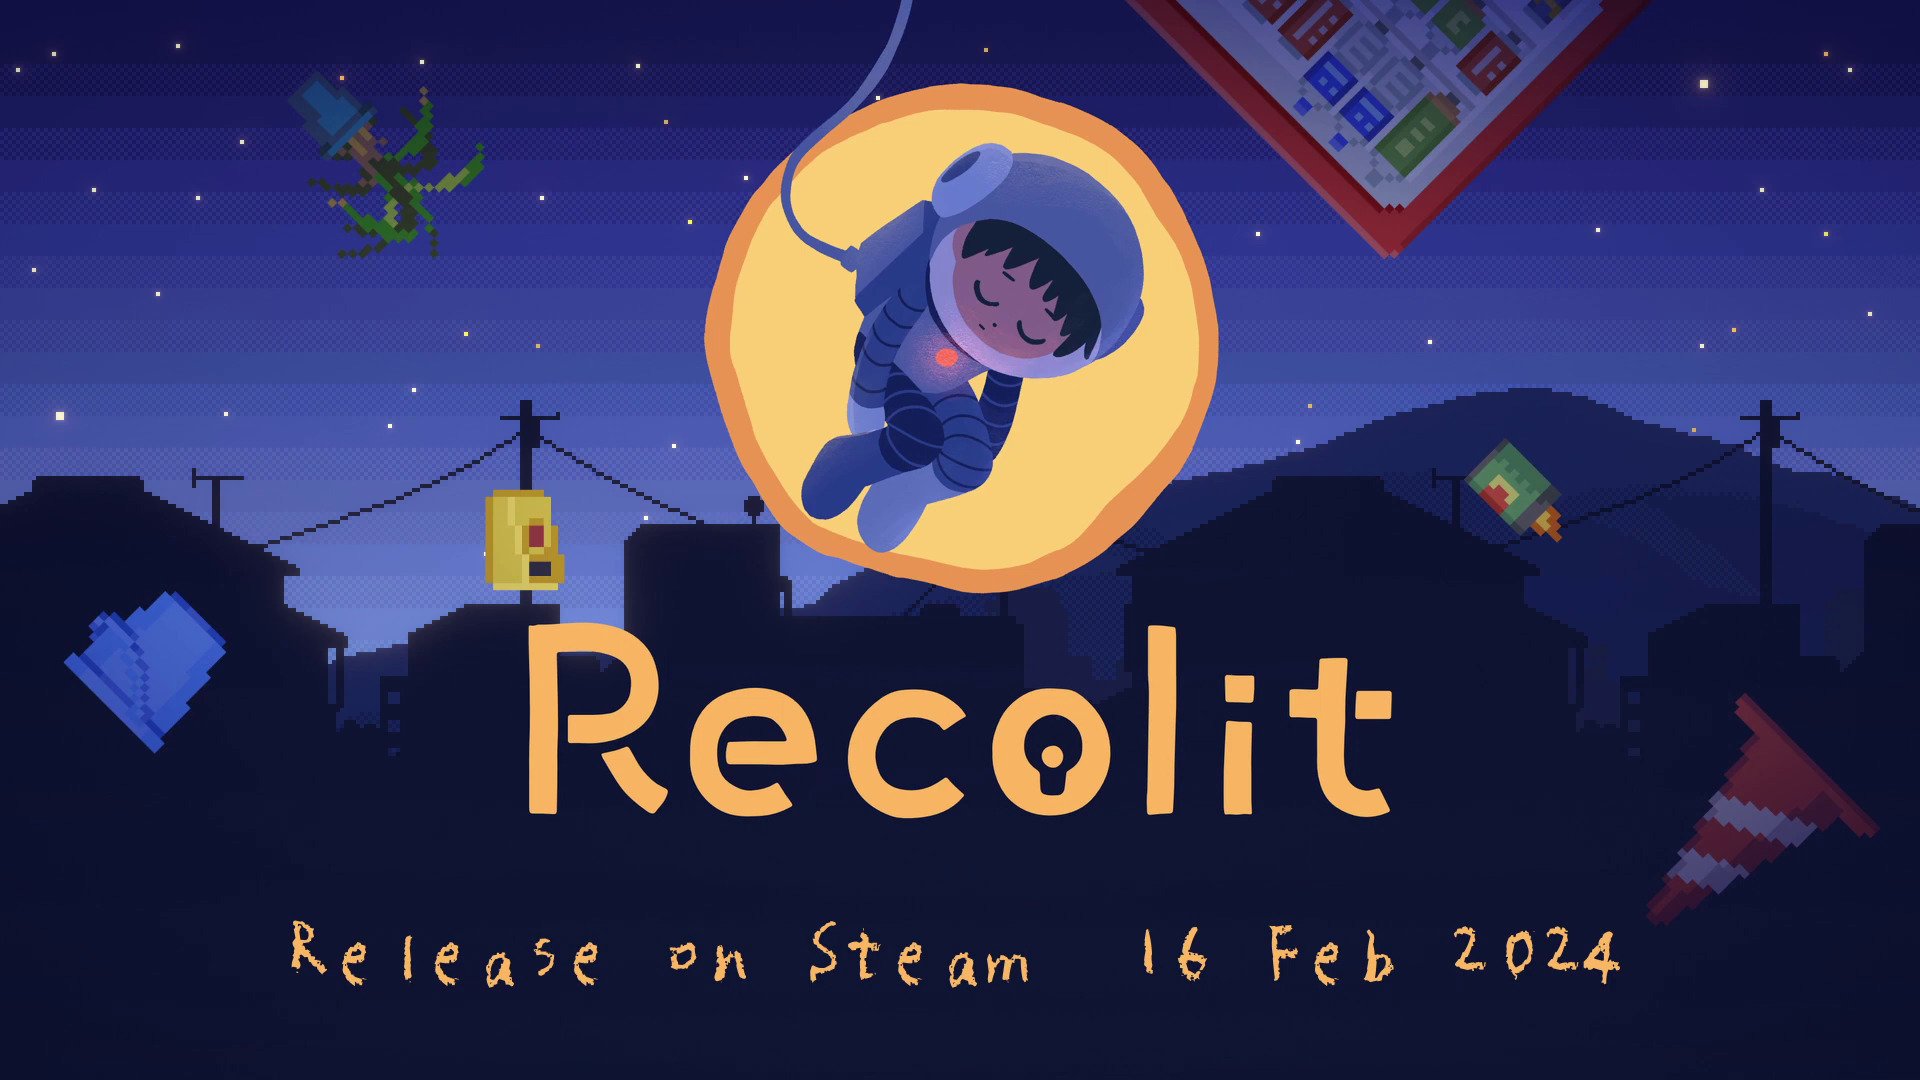 #
      Pixel art puzzle adventure game Recolit for PC launches February 16, 2024